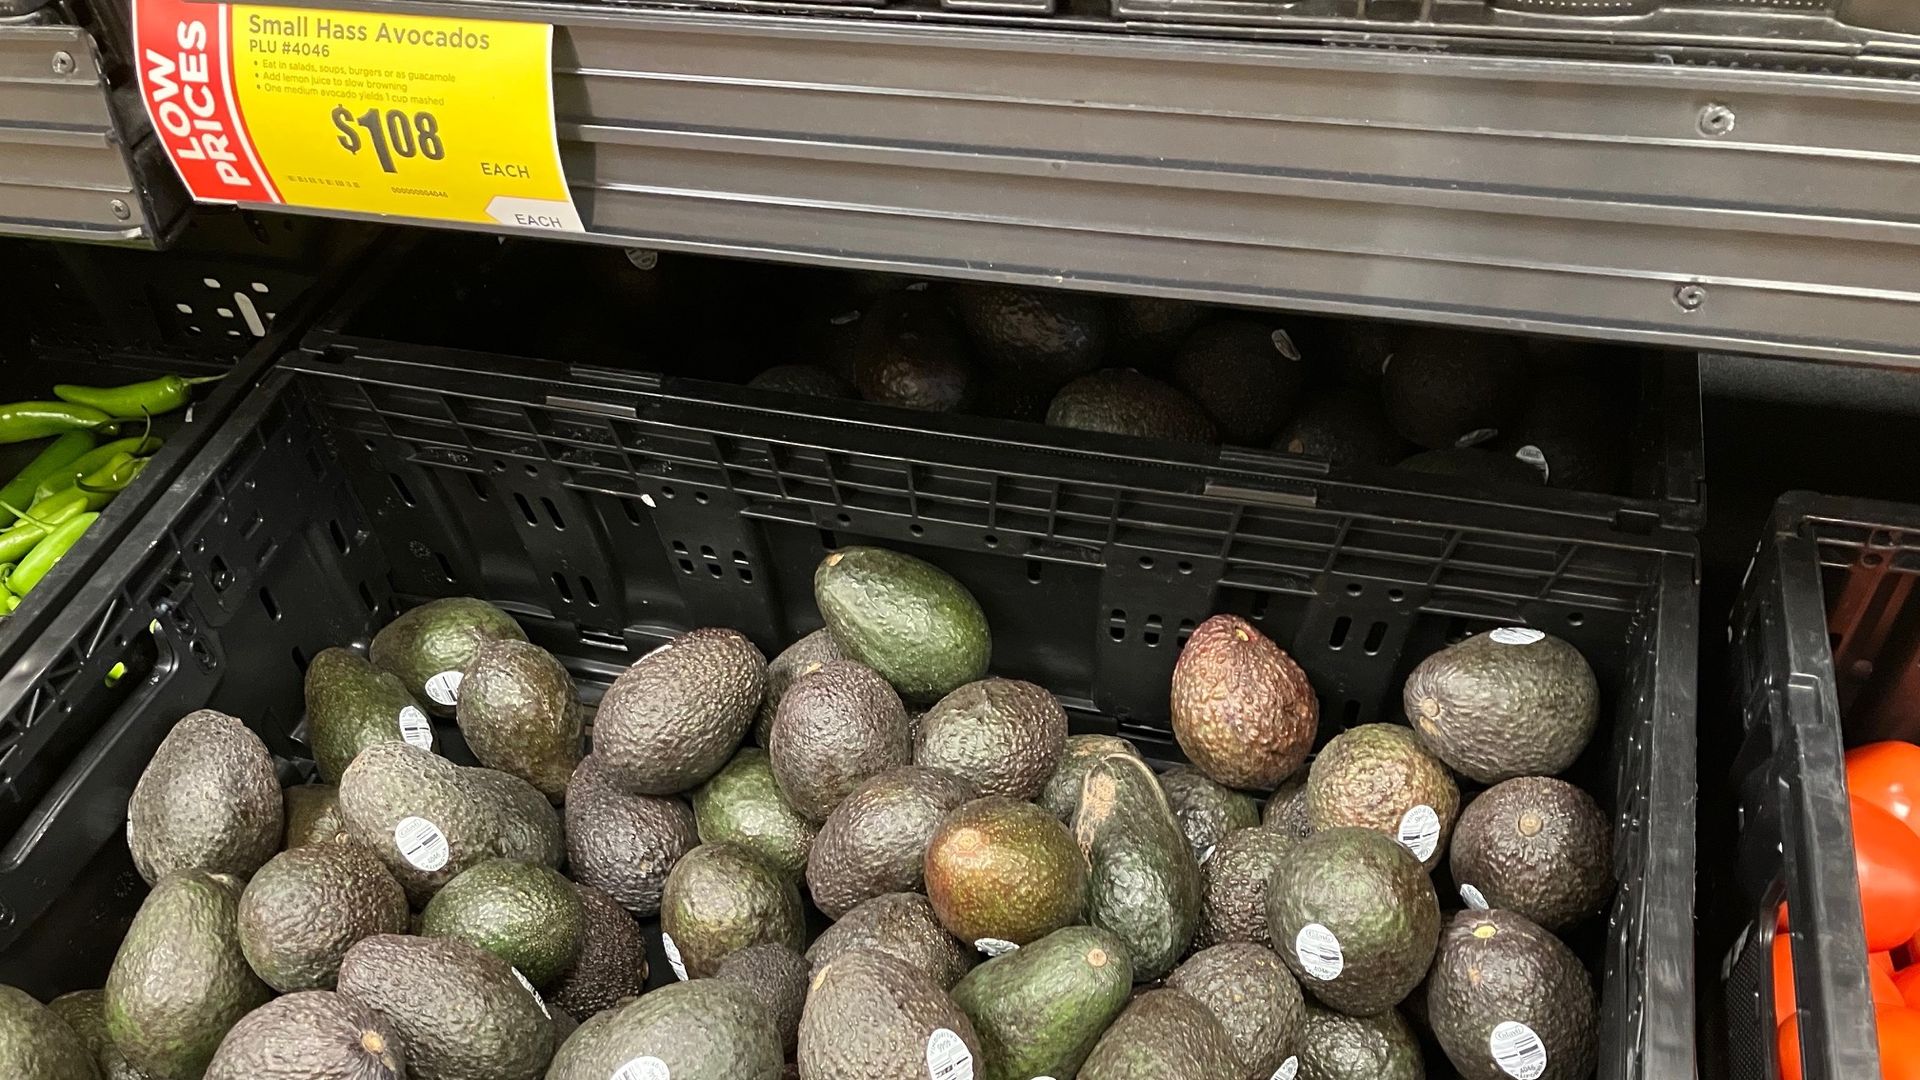 Avocados in a bin at H-E-B